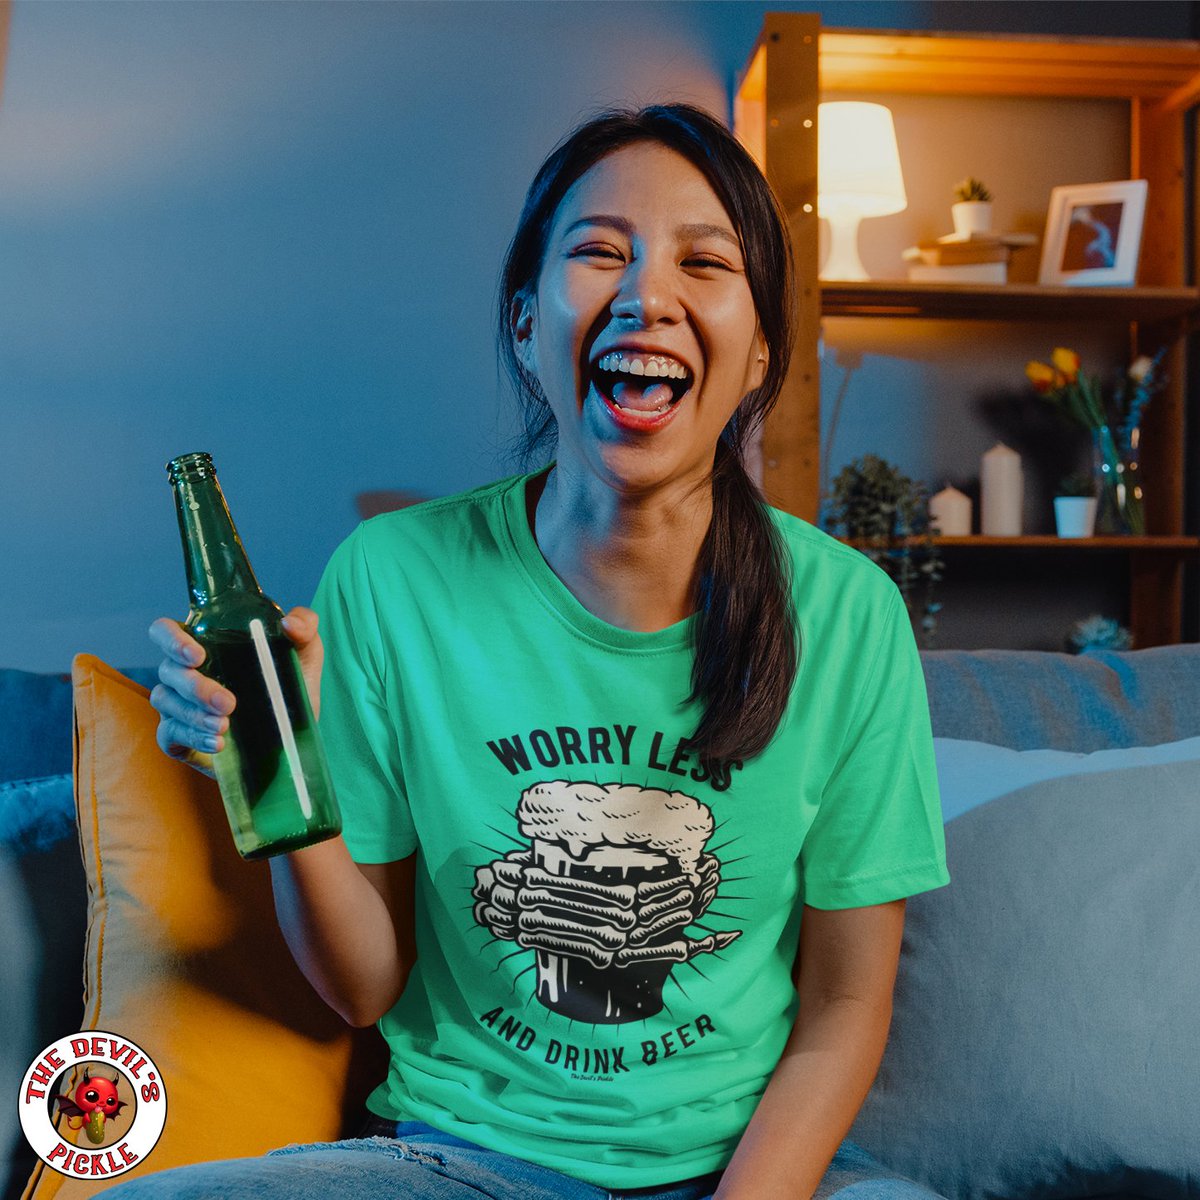 My kind of stress-relief: worry less, drink beer, repeat. Beer & Booze Drinking Tees, Hoodies and More only at The Devil's Pickle.

#ThirstyThursday #drinkup #beertshirts #byob #beeroclock #freeshipping #adulthumor #beer #SipSipHooray #funshirts #beerdrinking #beerandbooze